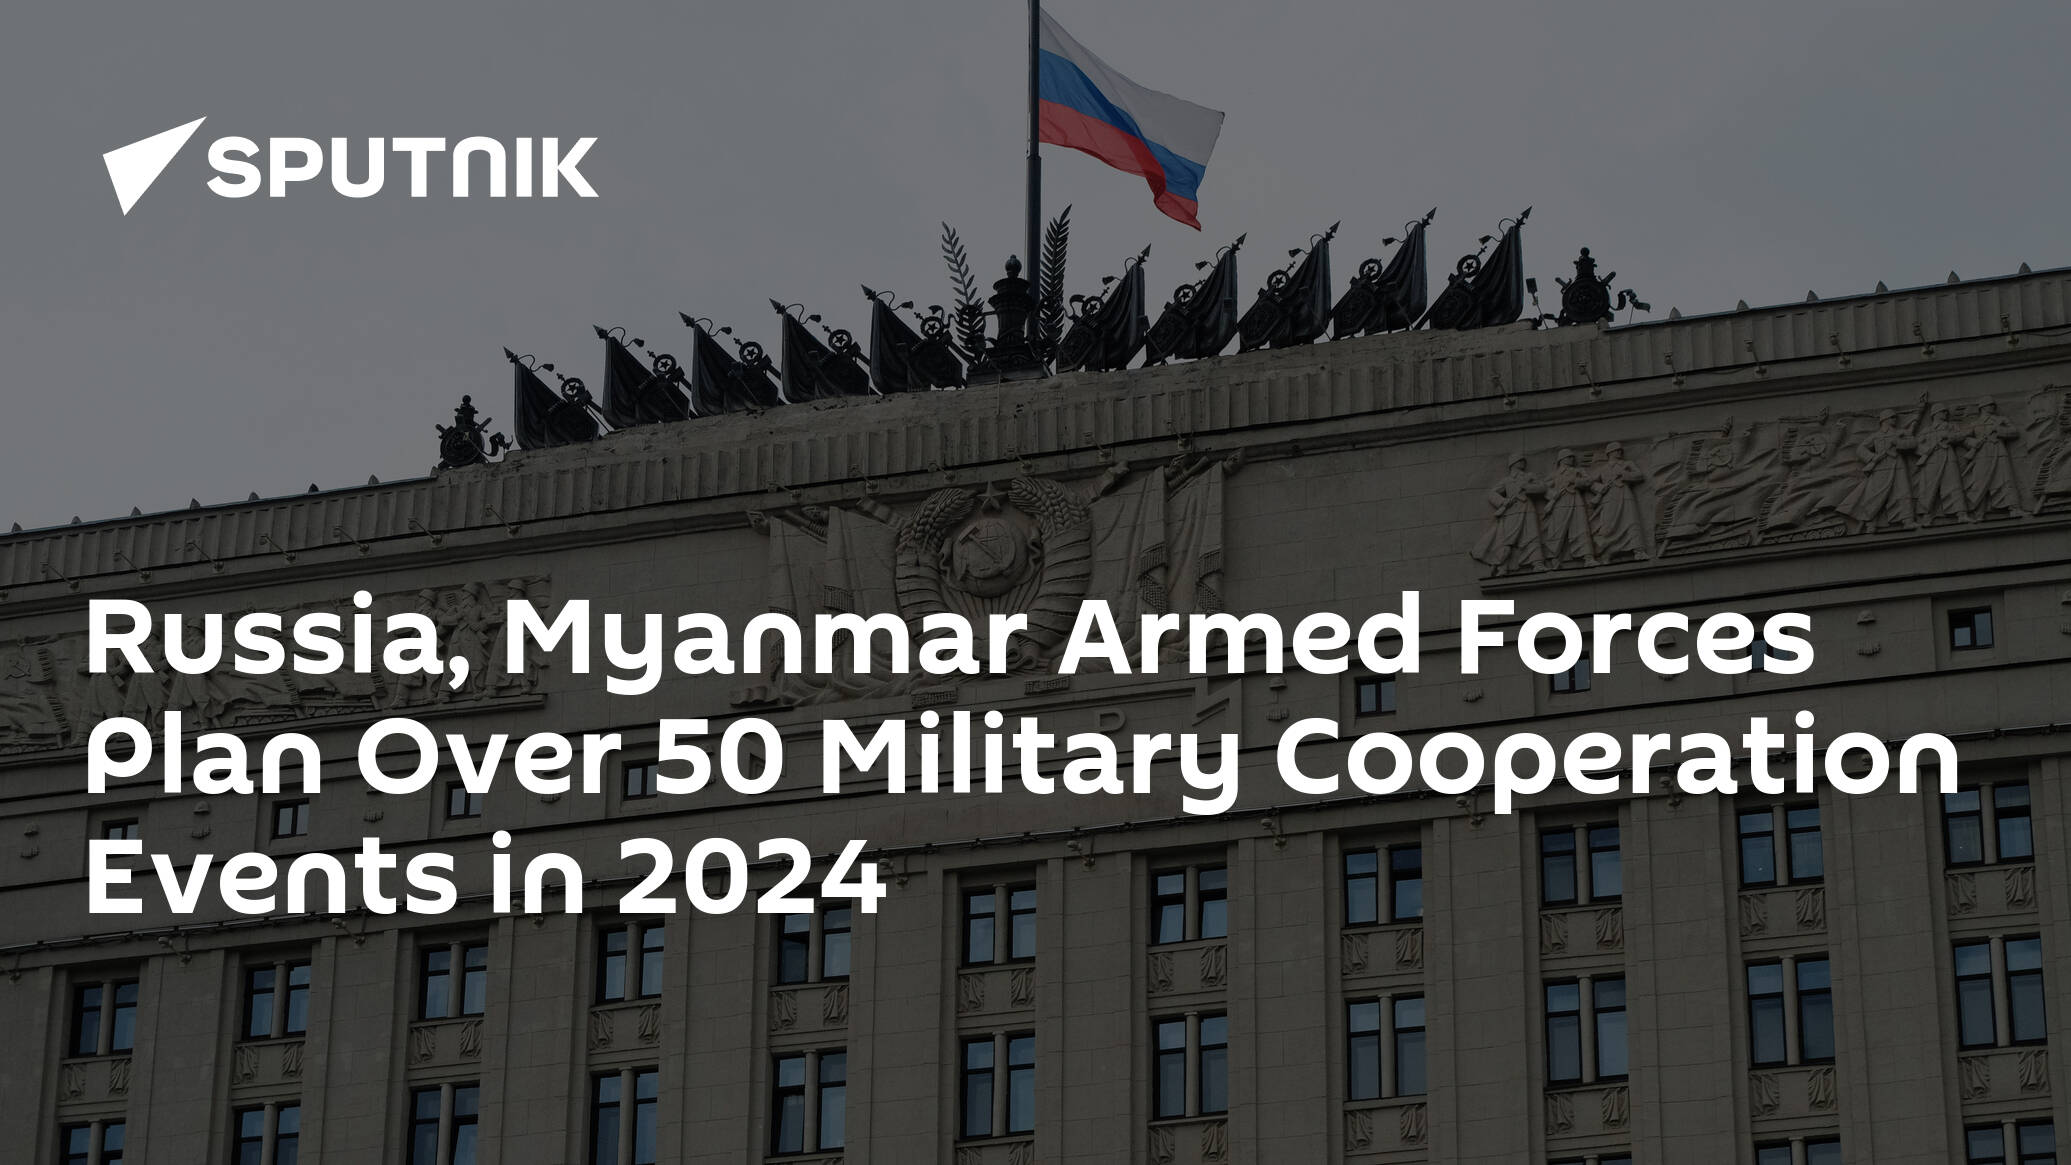 Russia, Myanmar Armed Forces Plan Over 50 Military Cooperation Events in 2024